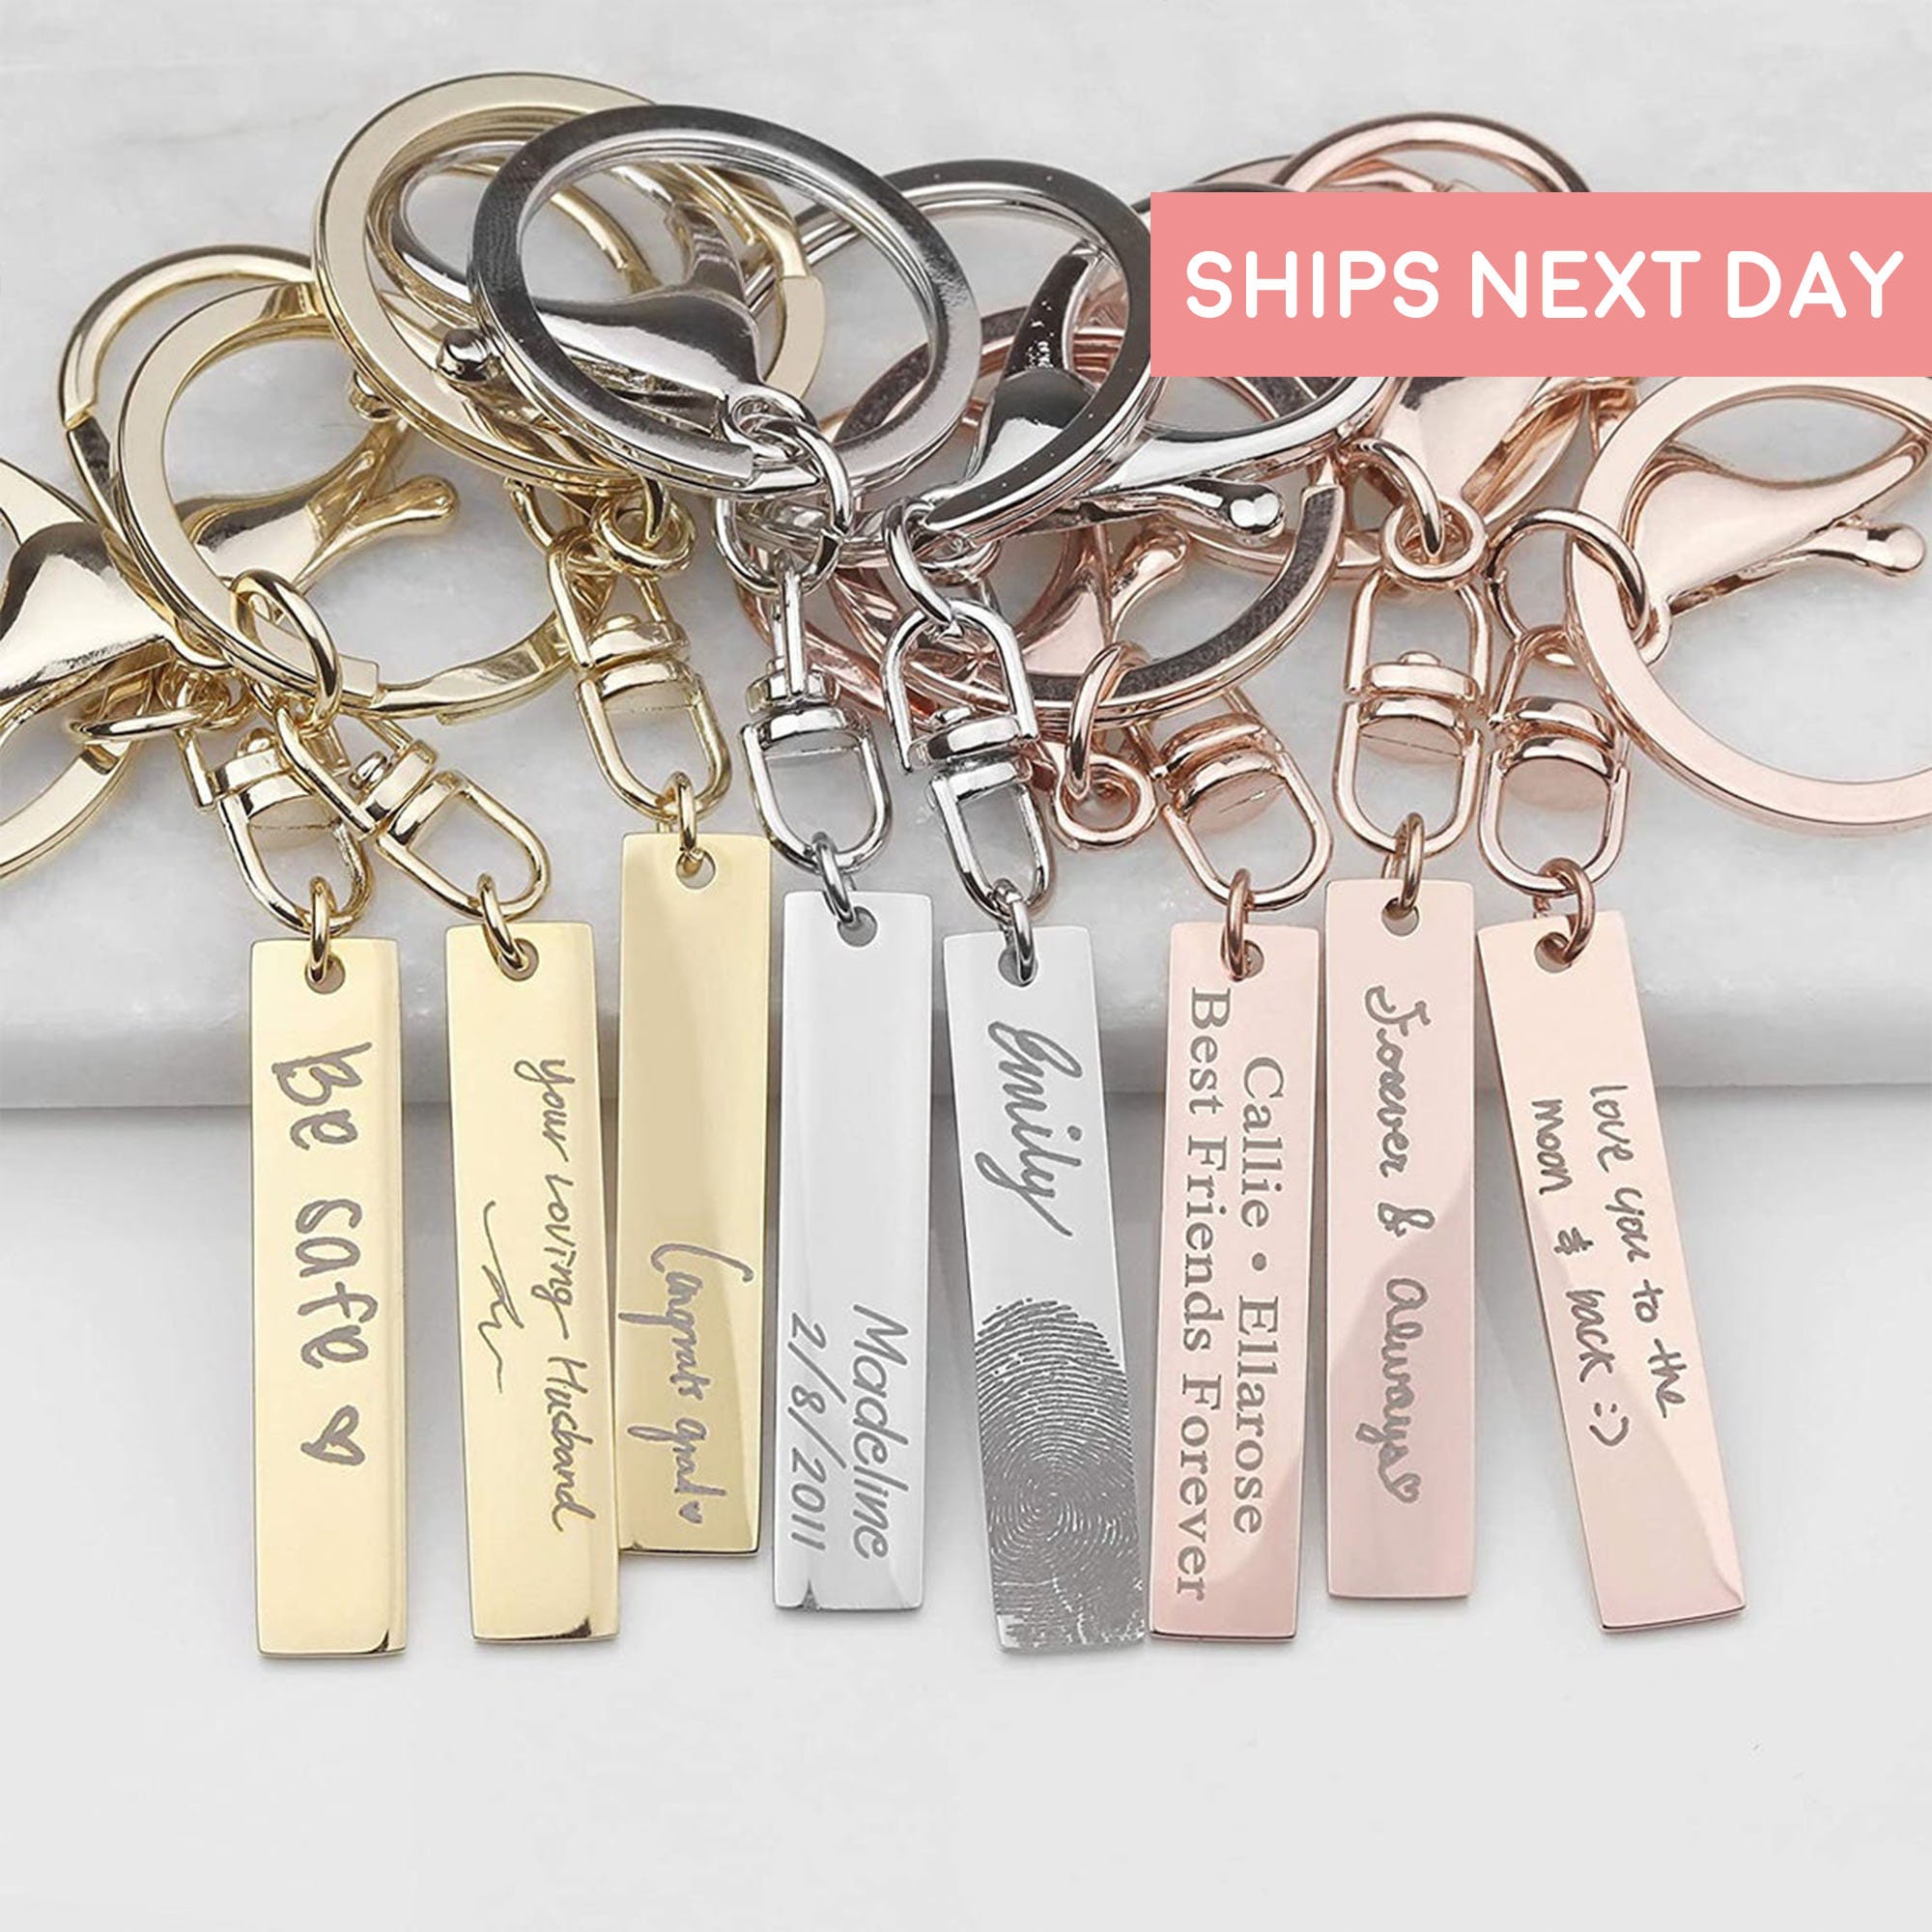 QMVMV Inspirational Daughter Keyring Birthday Christmas Gifts from Mum Dad Family Tree Keychain Engraved